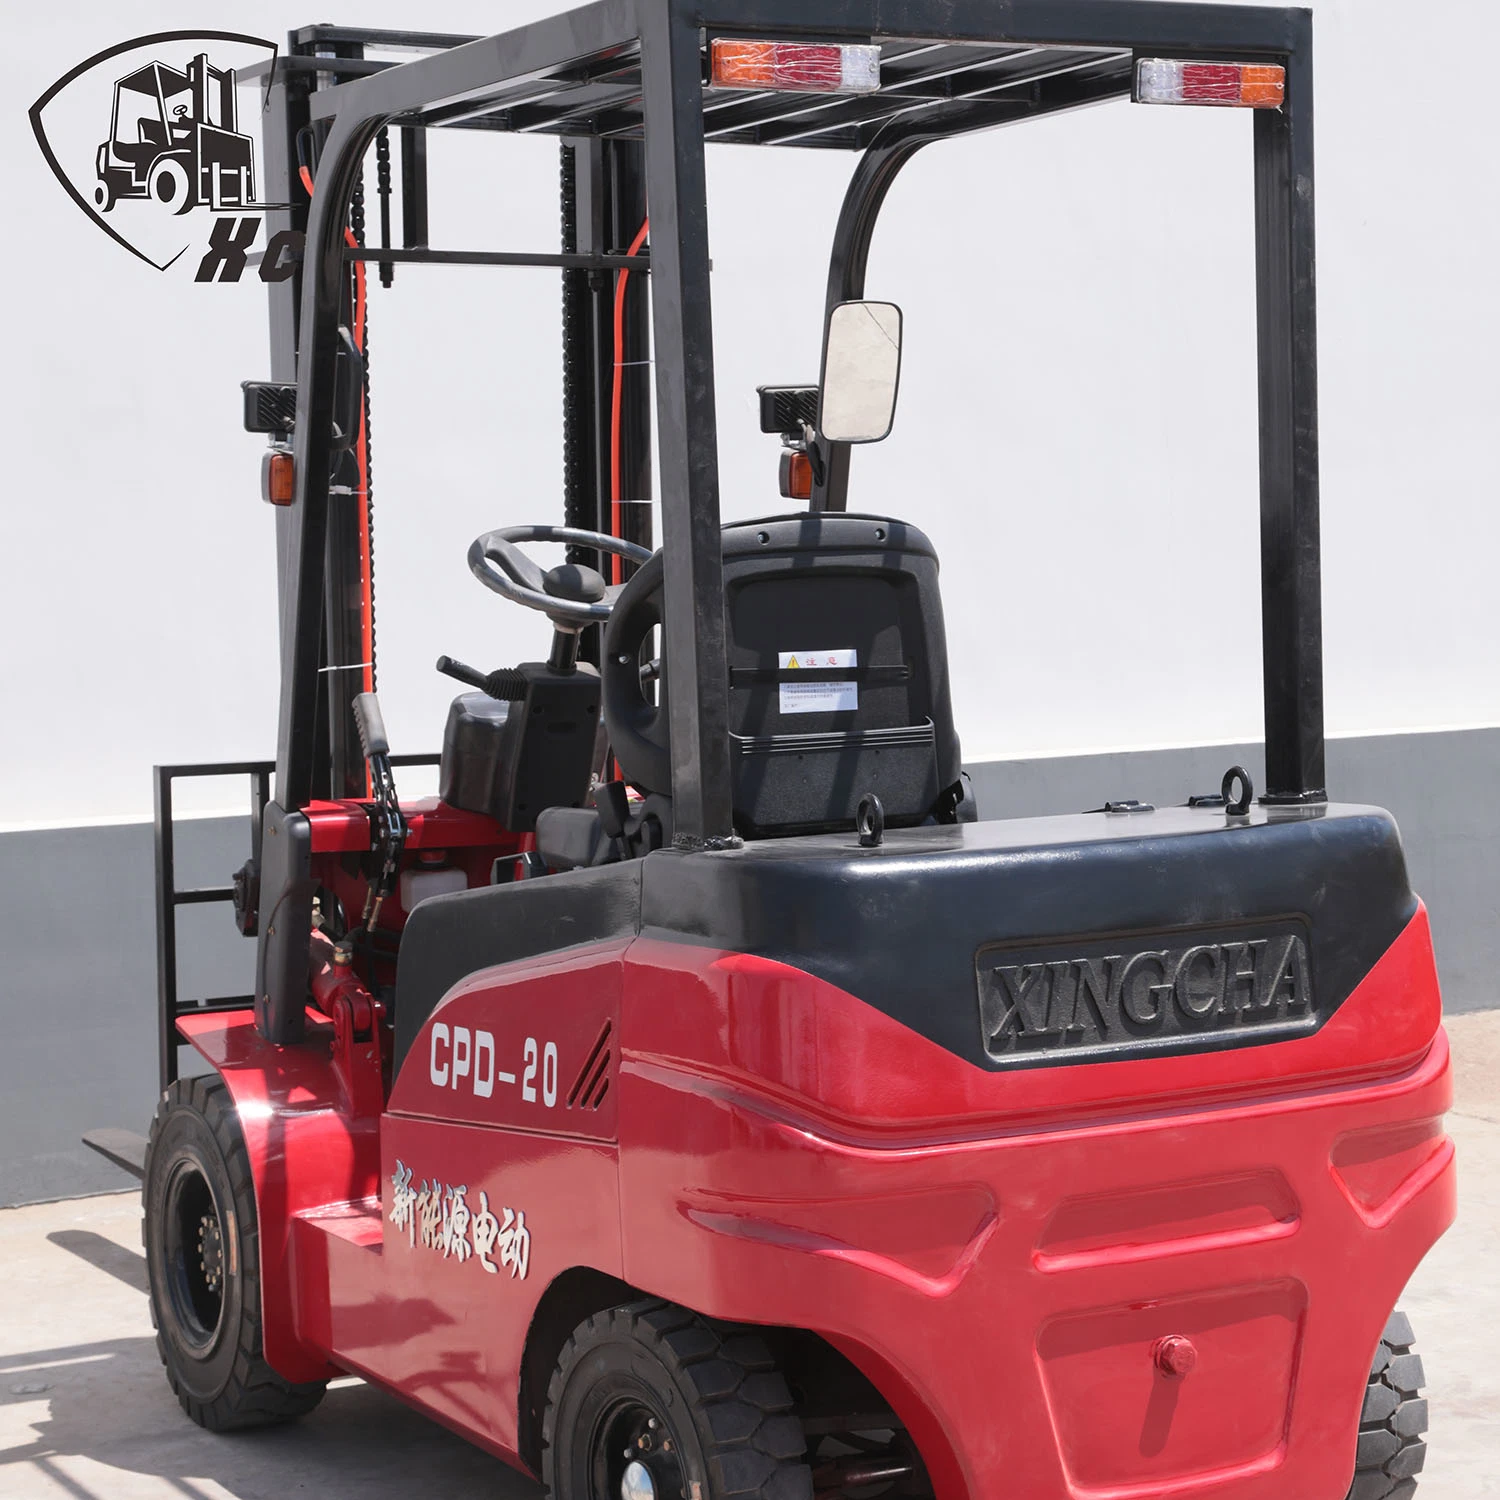 Xingcha 1-5ton New Energy Full Electric Warehouse Stacker Forklift Truck Equipment Electric Hydraulic Fork Lift Truck